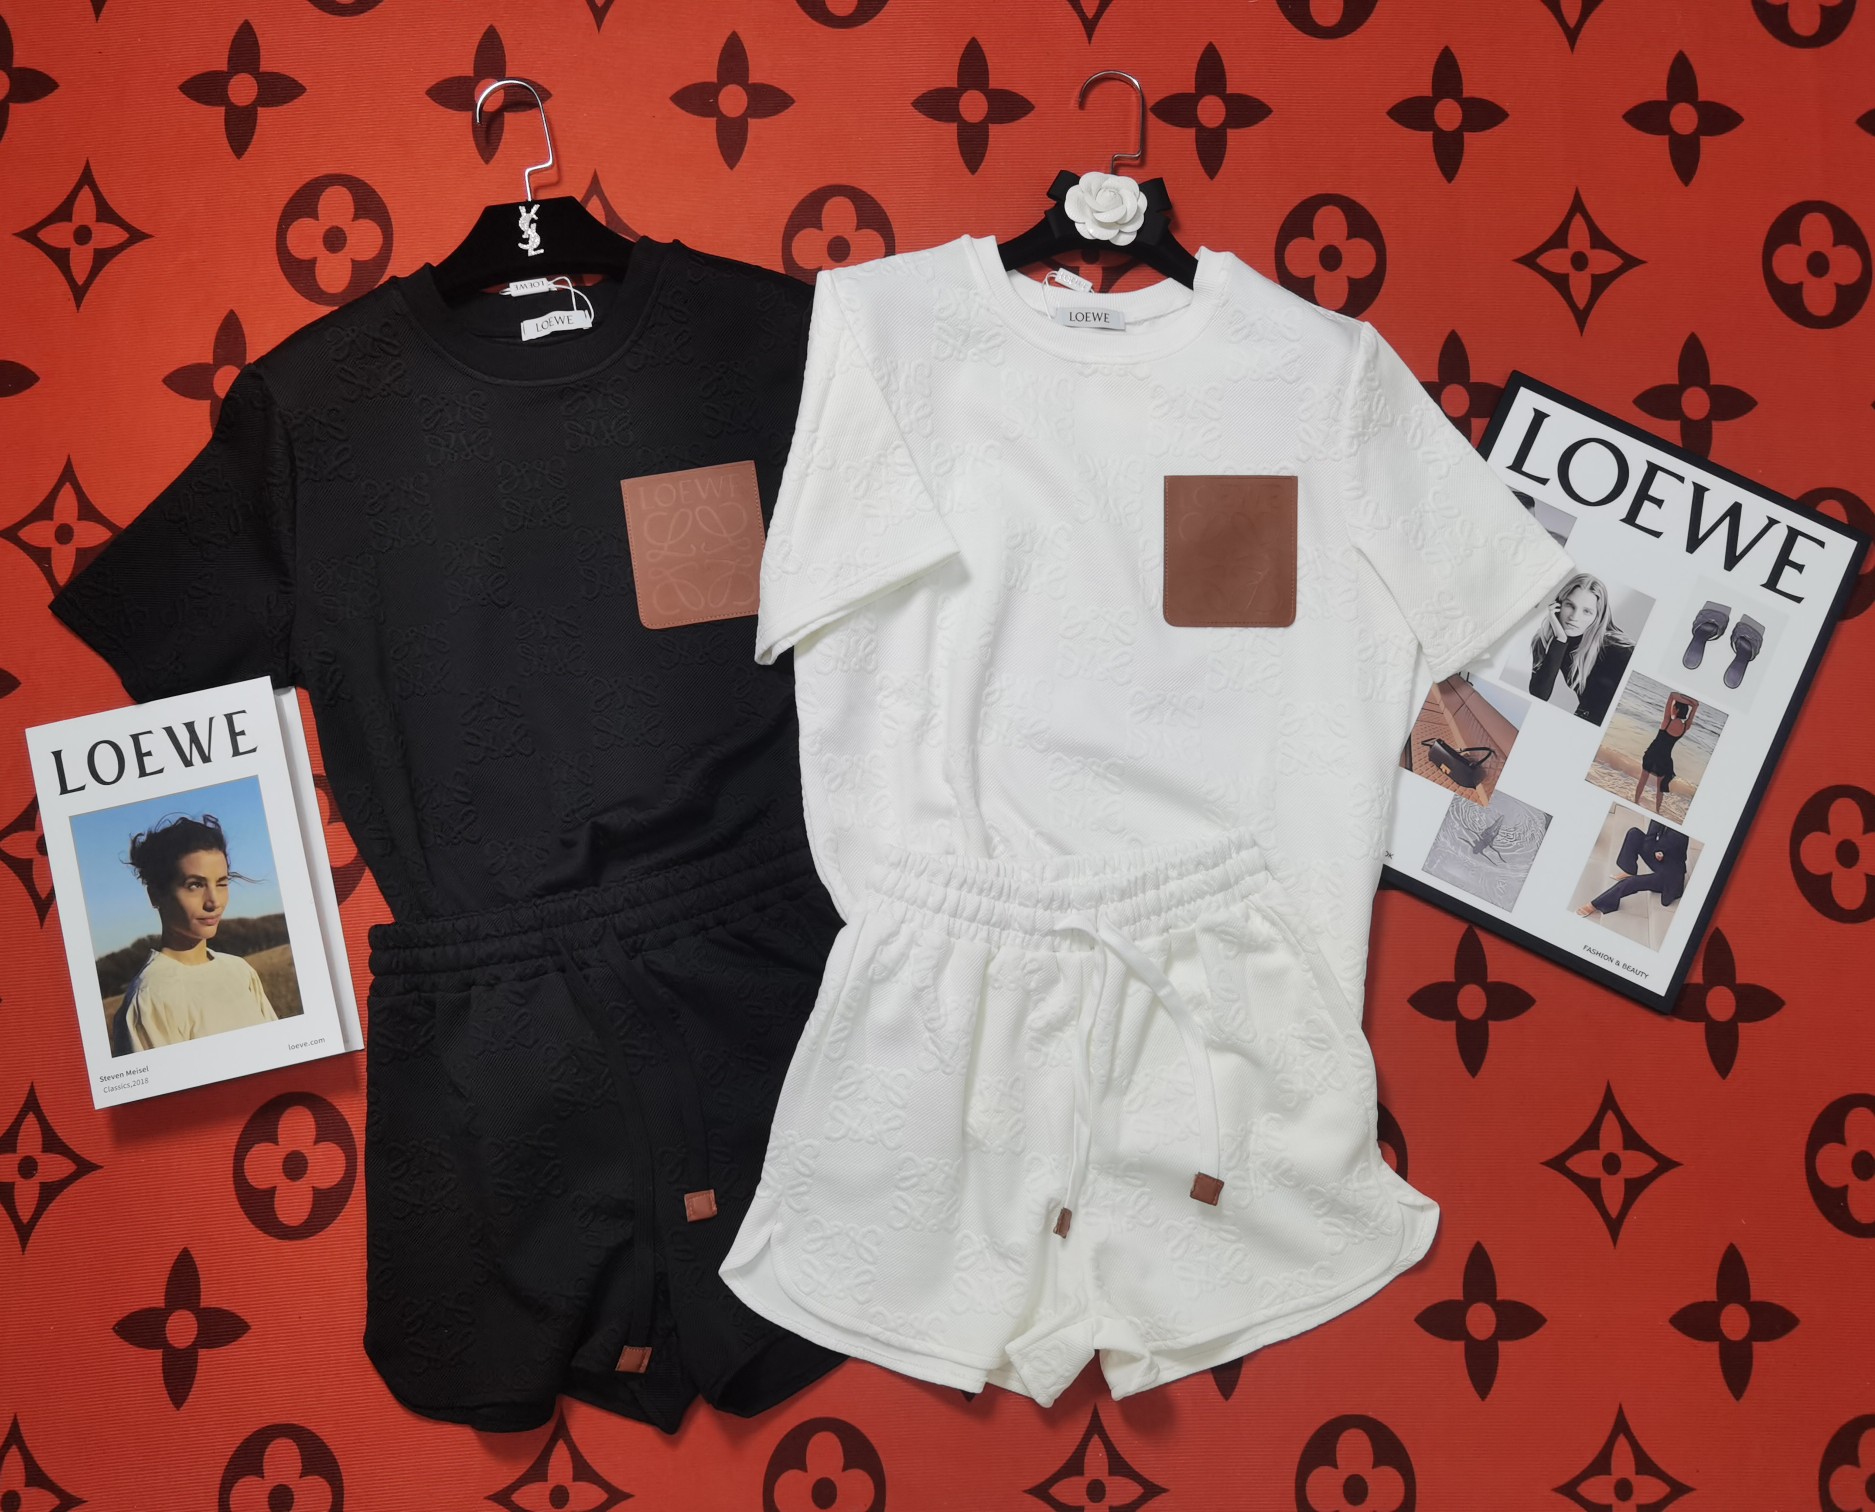 Loewe Clothing T-Shirt Two Piece Outfits & Matching Sets Black White Short Sleeve